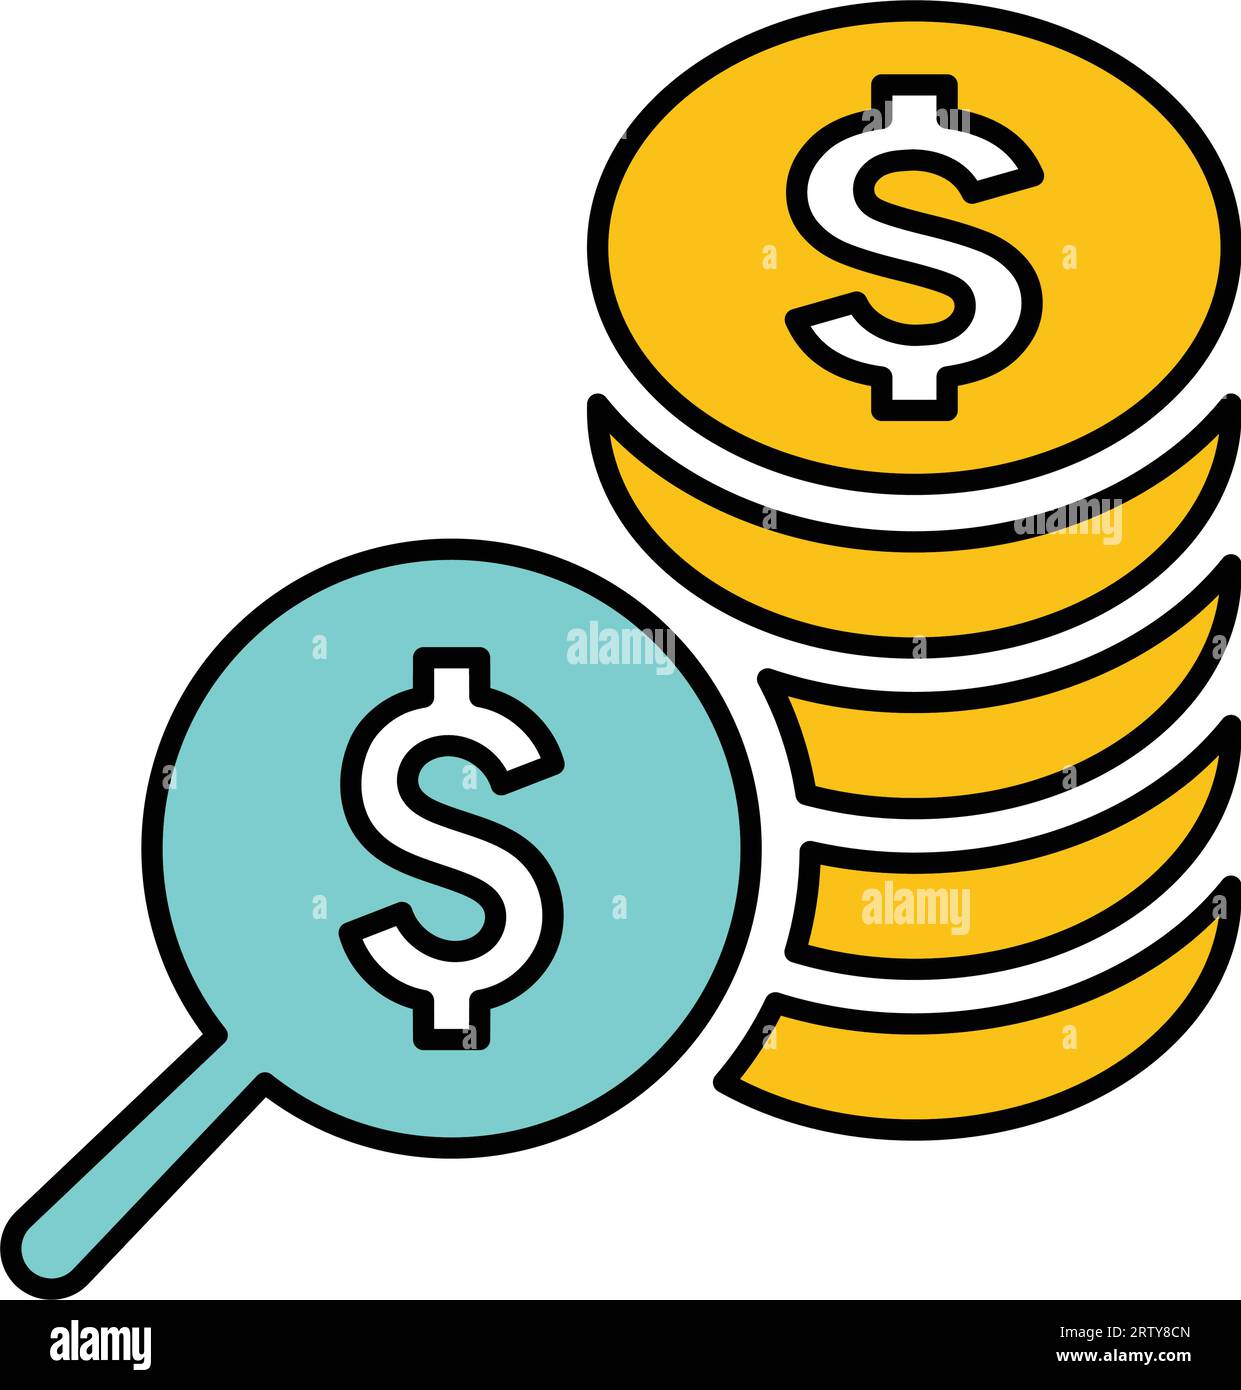 Funding source finding icon. Use for designing and developing websites, commercial purposes, print media, web or any type of design task. Stock Vector